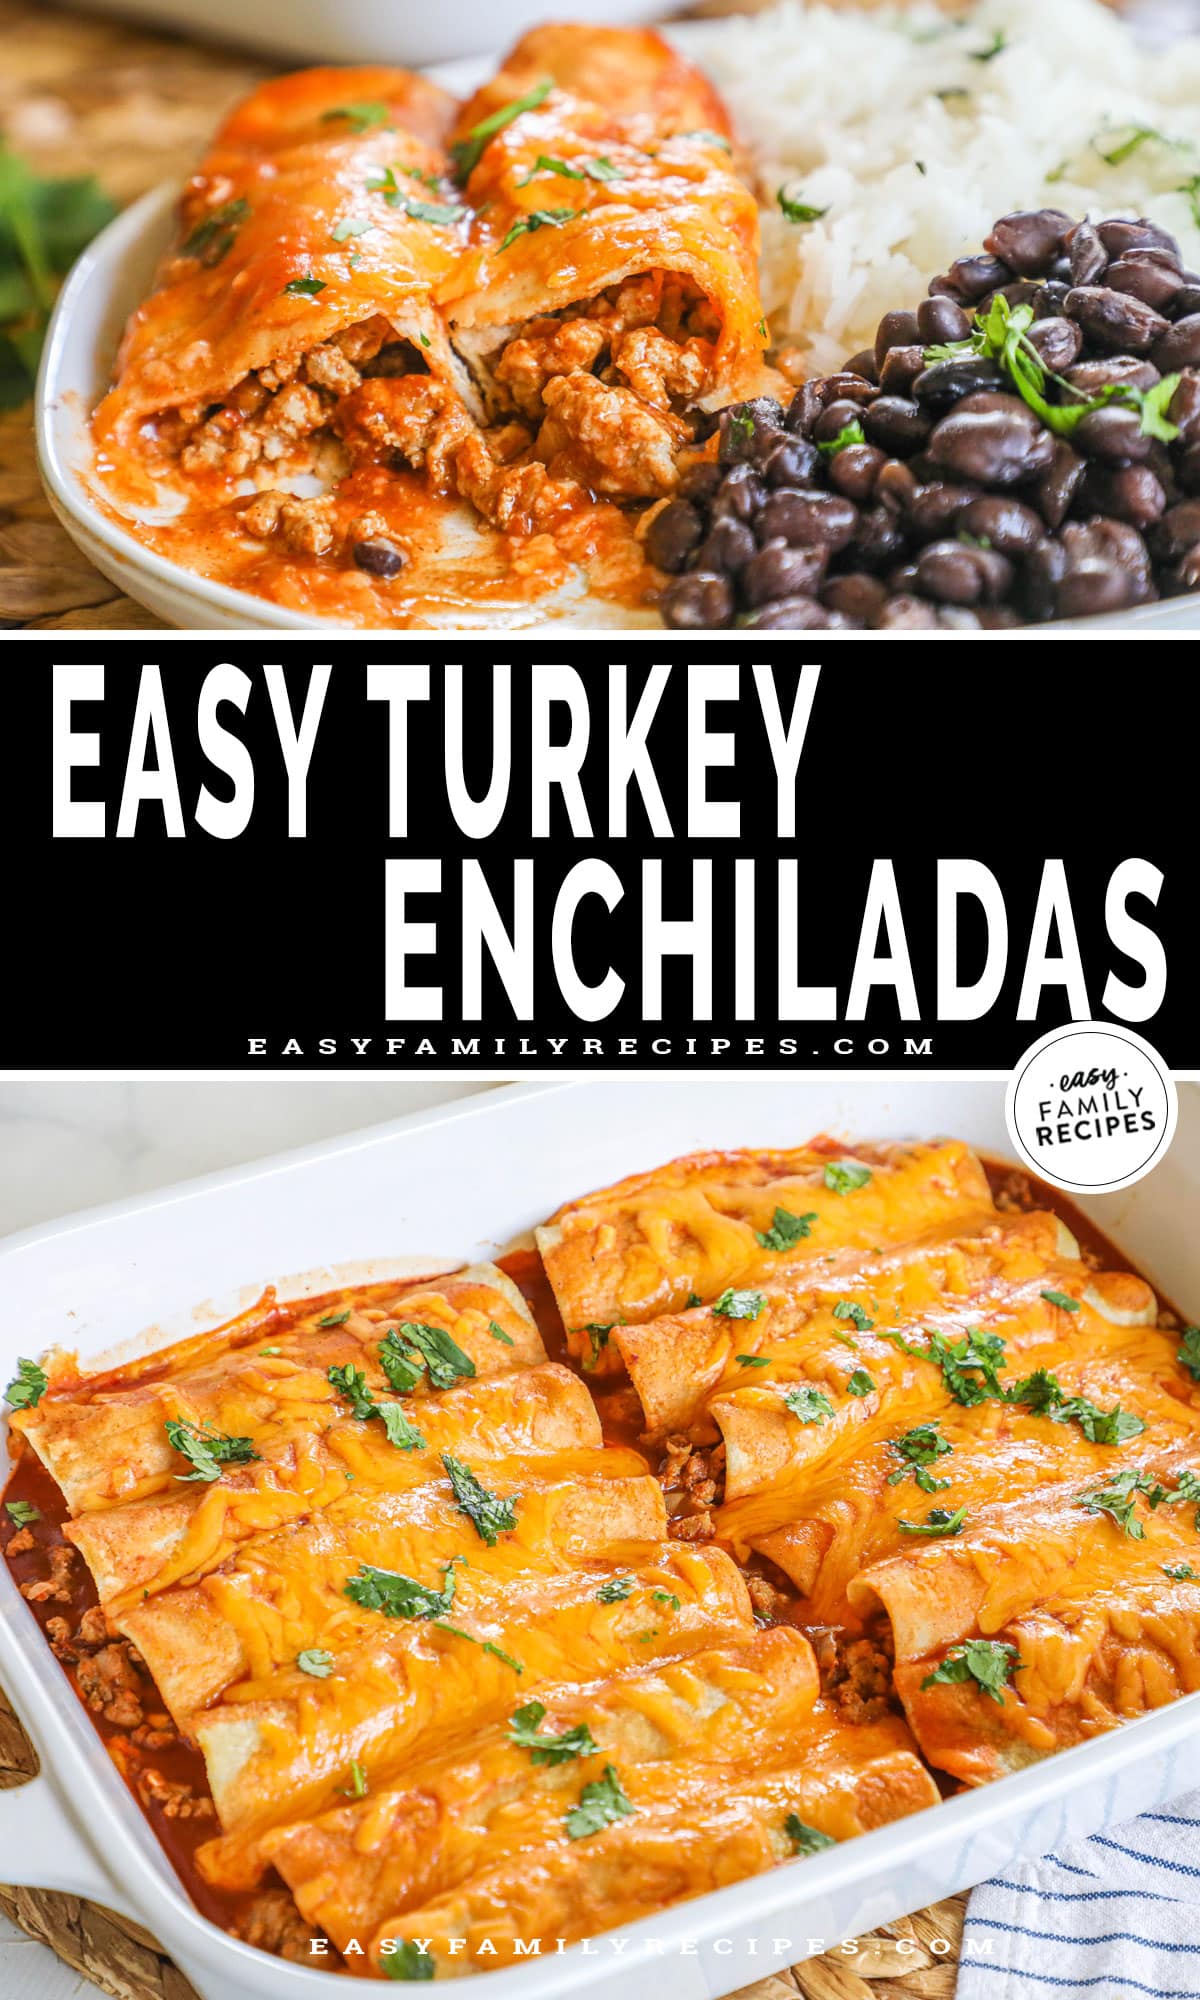 Easy turkey enchiladas recipe collage showing it plated with rice and beans in the top photo and the full baking dish of enchiladas below.